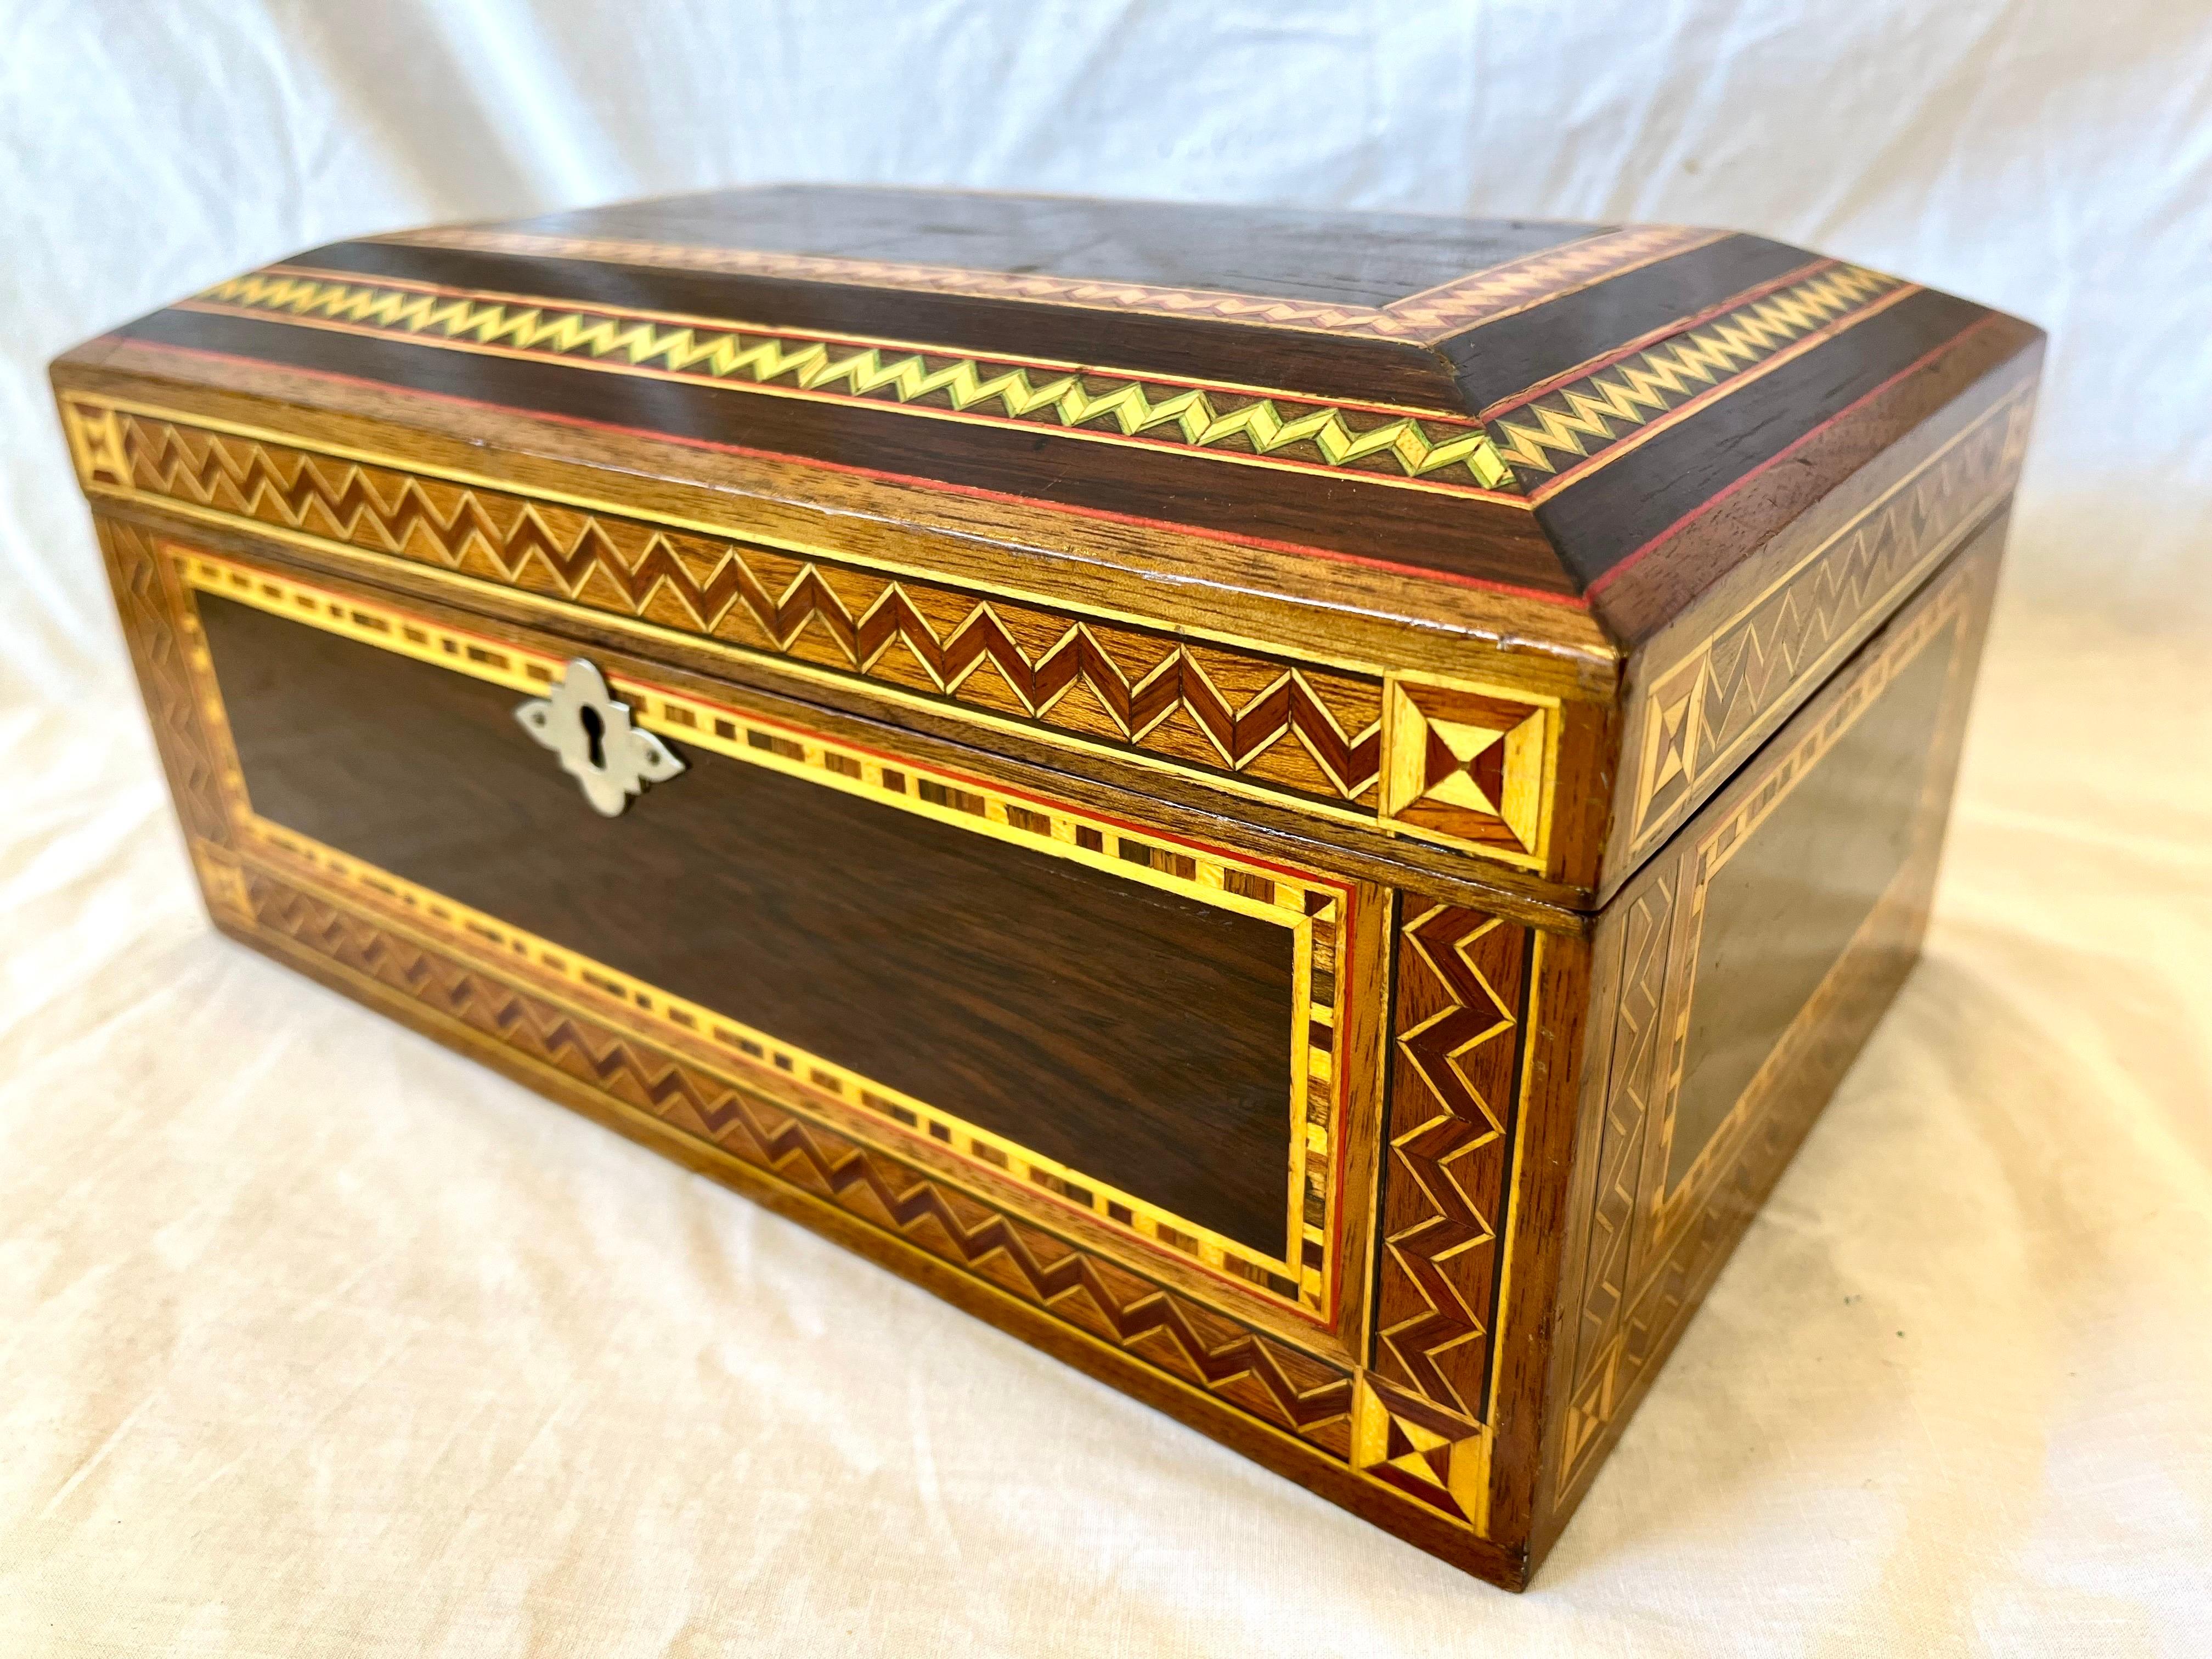 Anglo-Indian Vintage Marquetry Wood Inlaid Jewelry Casket Box with Mirror and Velvet Interior